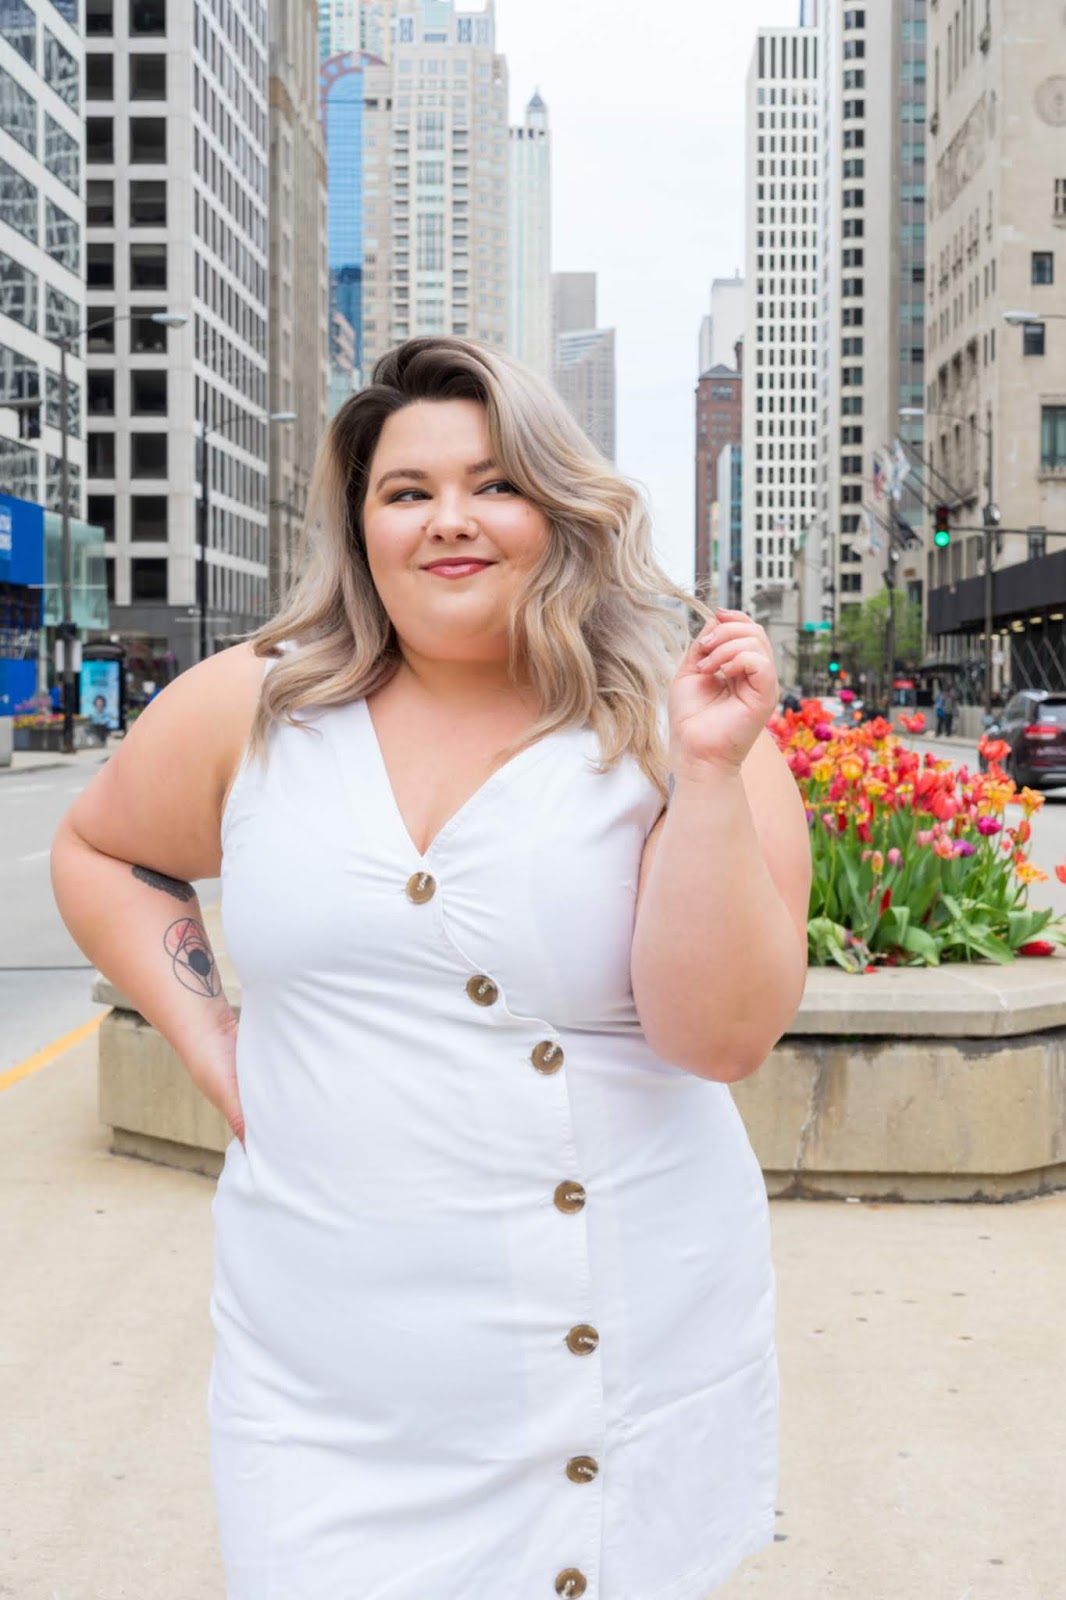 Chicago Plus Size Petite Fashion Blogger, YouTuber, and model Natalie Craig, of Natalie in the City, review's CoEdition and Warp + Weft.